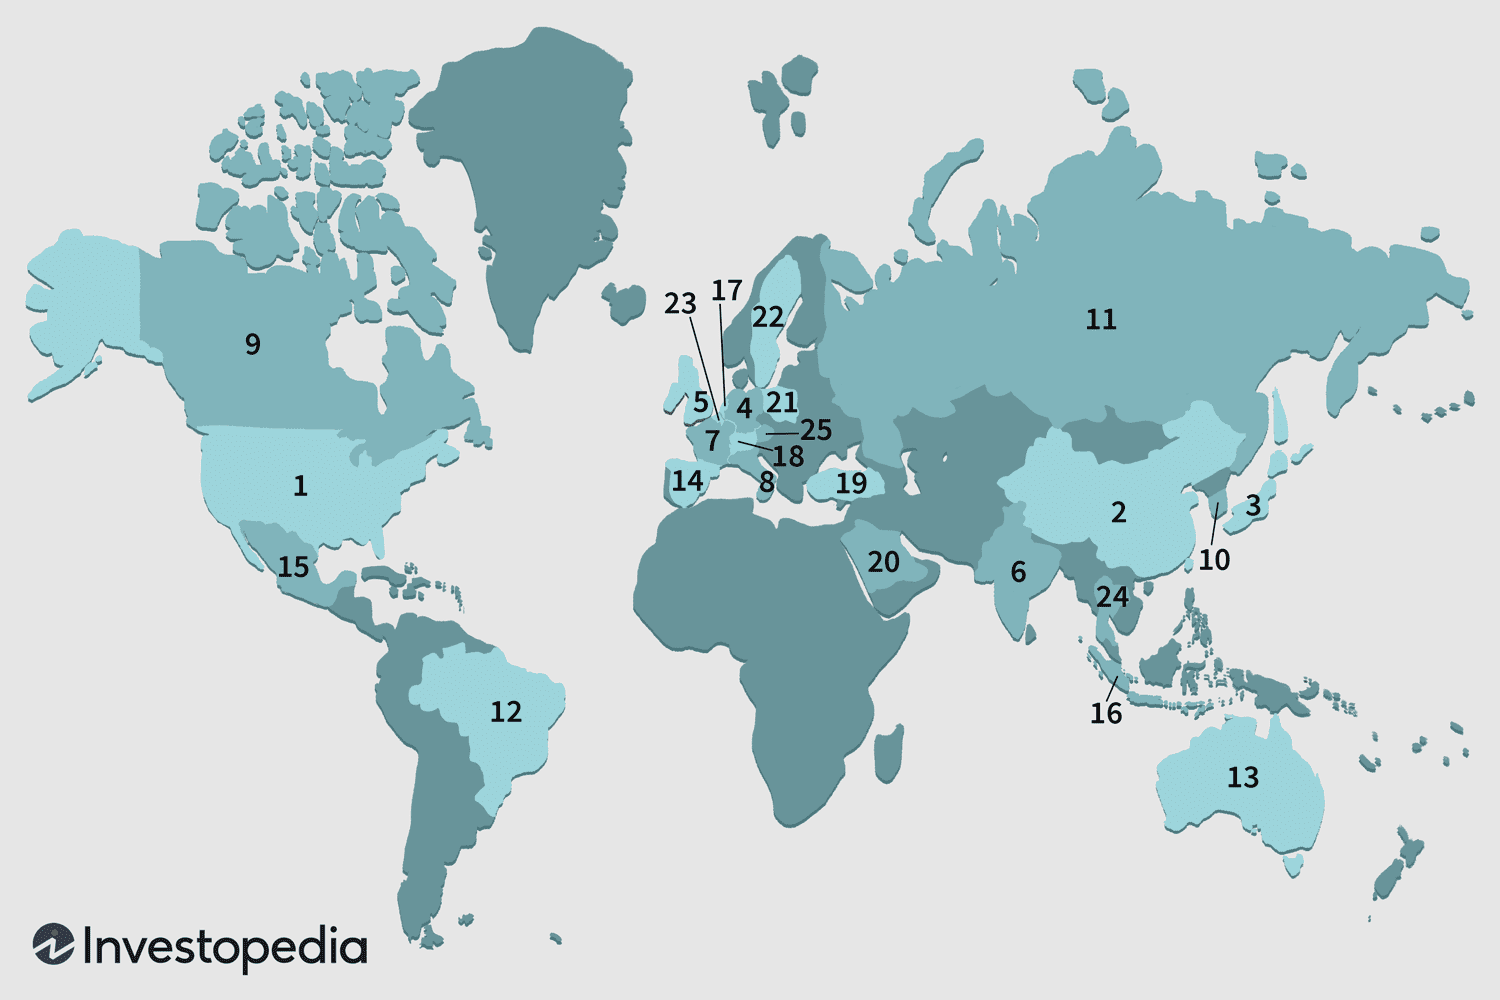 Countries by GDP: The Top 25 Economies in the World